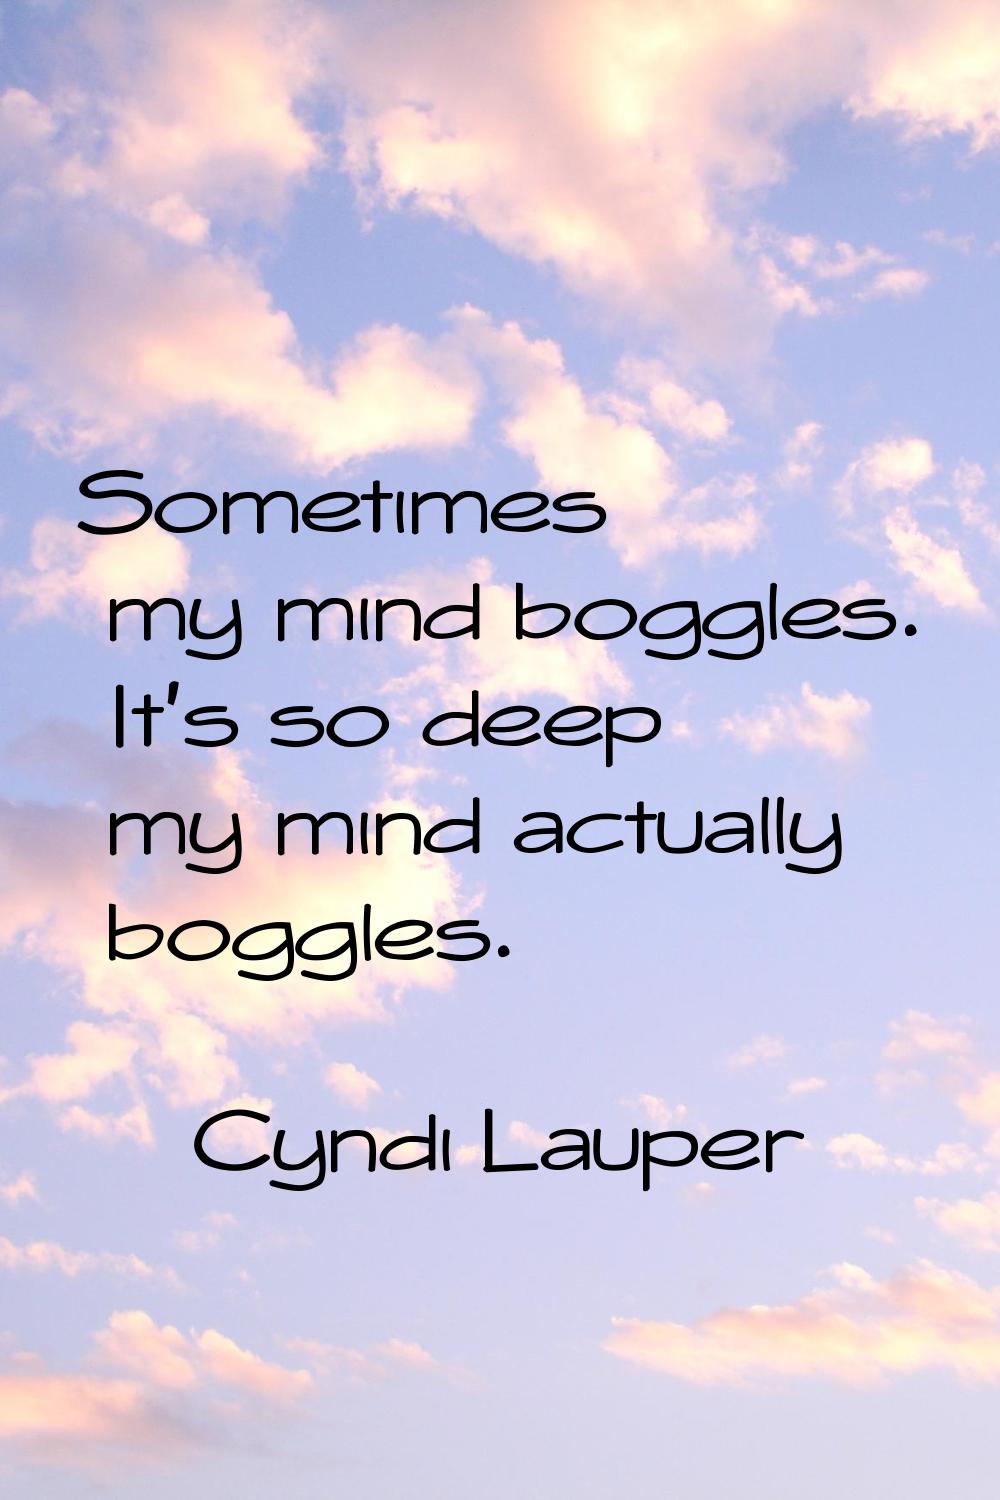 Sometimes my mind boggles. It's so deep my mind actually boggles.